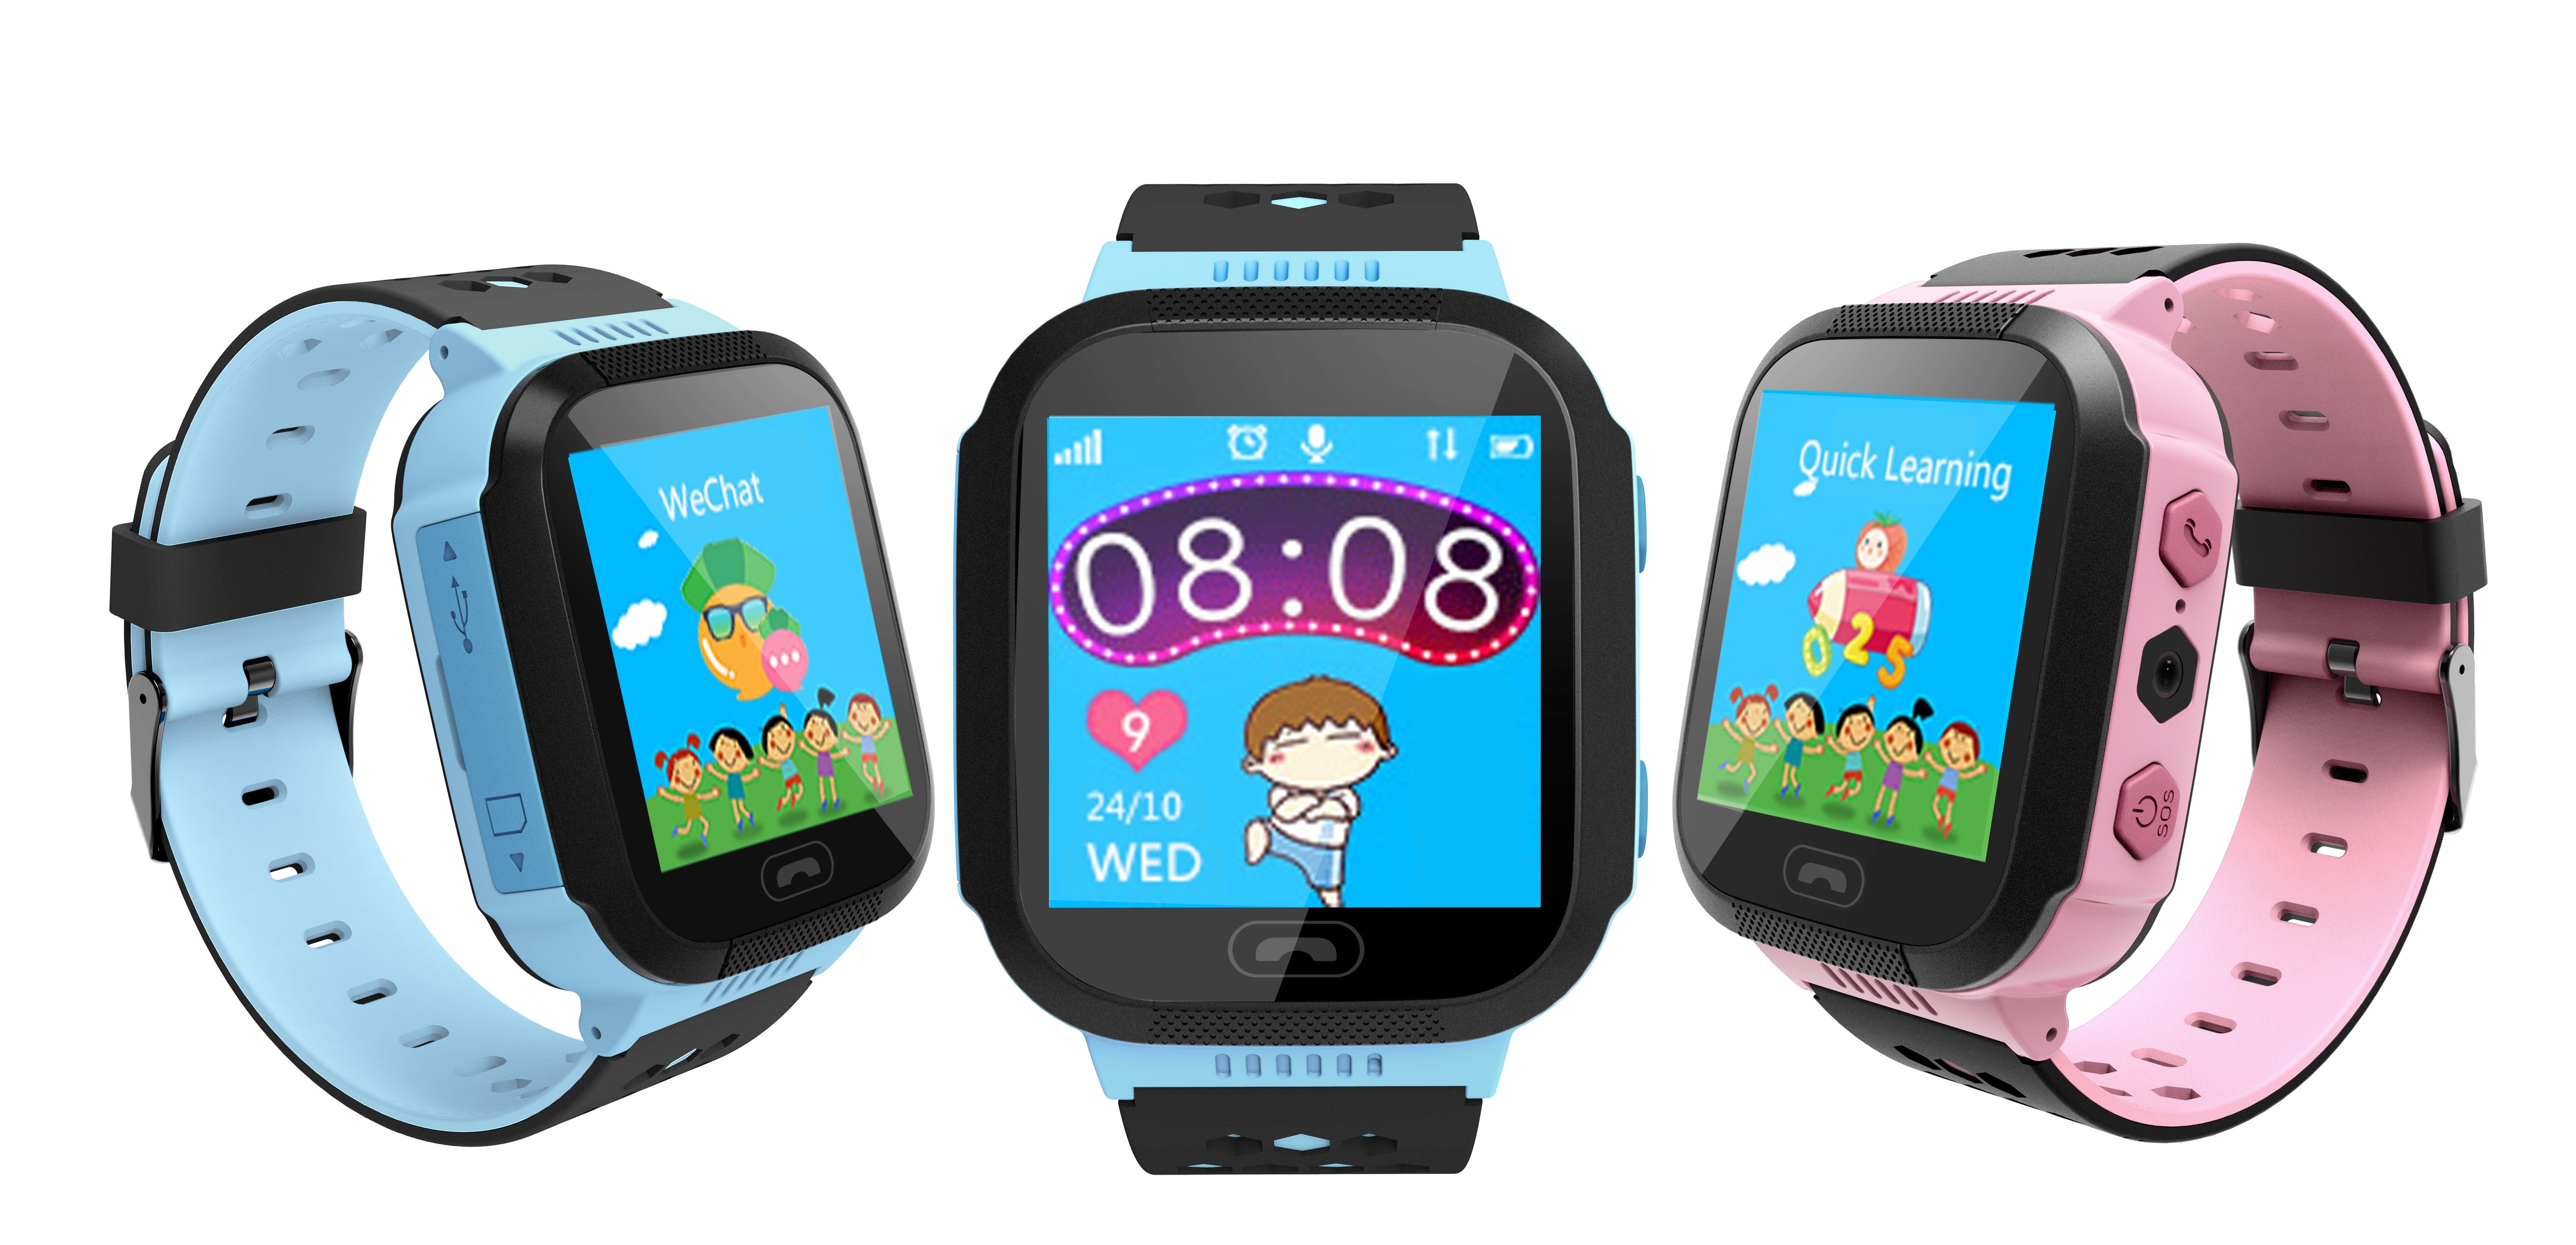  HS6620 Boys Screen Touch Watch Manufactures